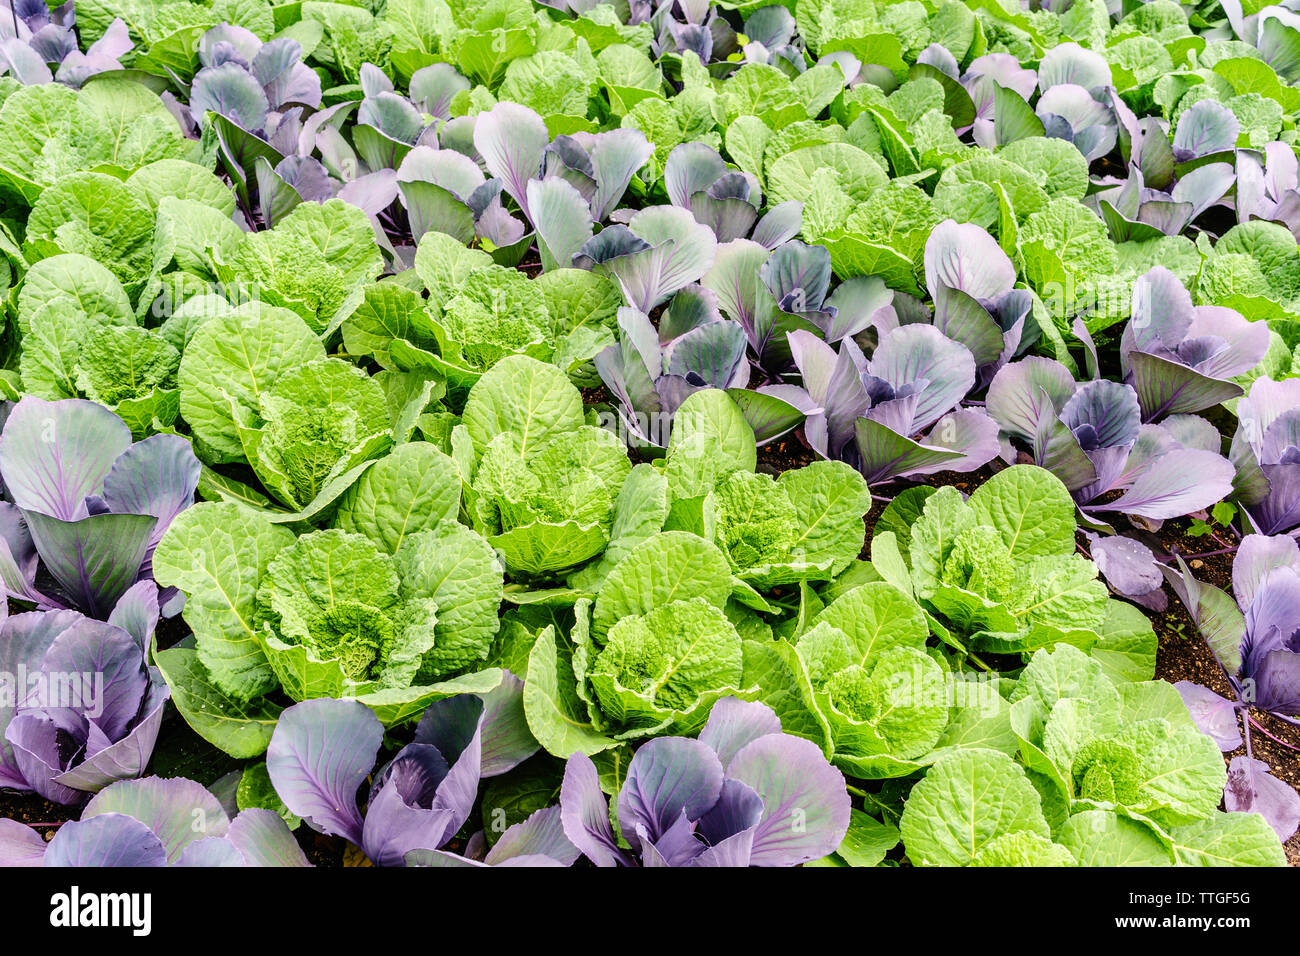 Alternating rows of cabbage cultivars in vegetable garden in spring Stock Photo